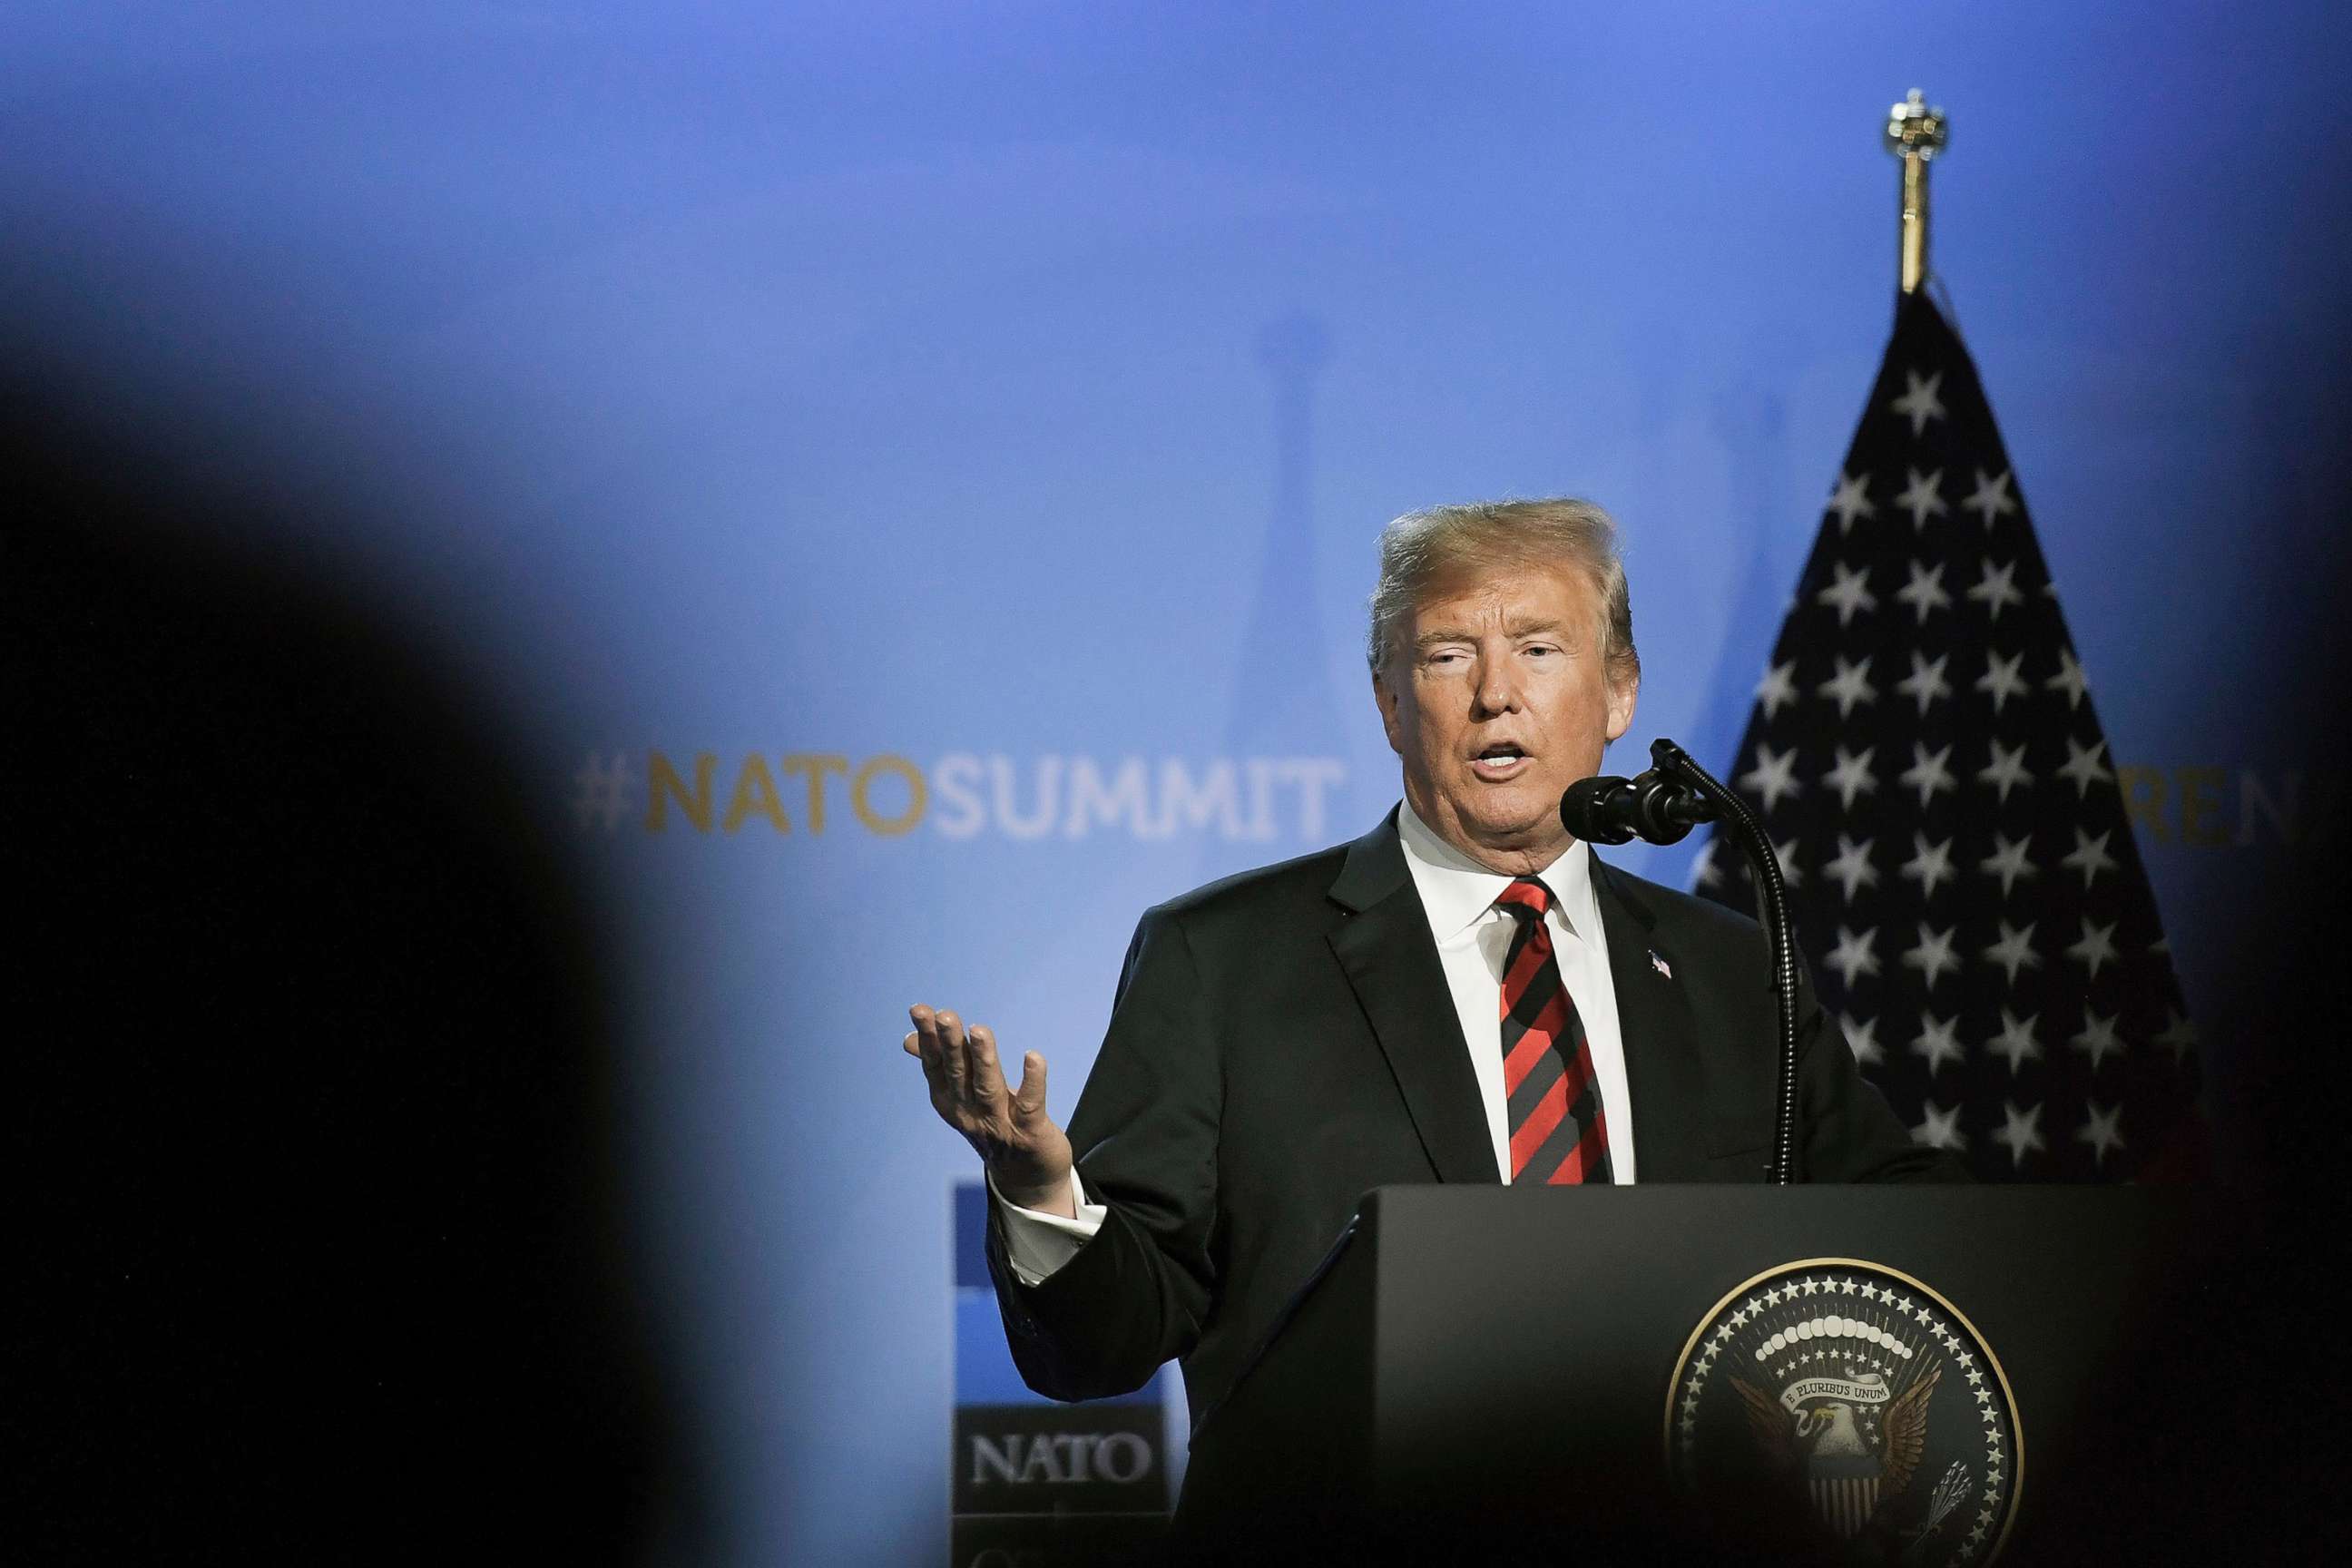 PHOTO: President Donald J. Trump speaks during a press conference on the second day of the NATO Summit in Brussels, July 12, 2018.